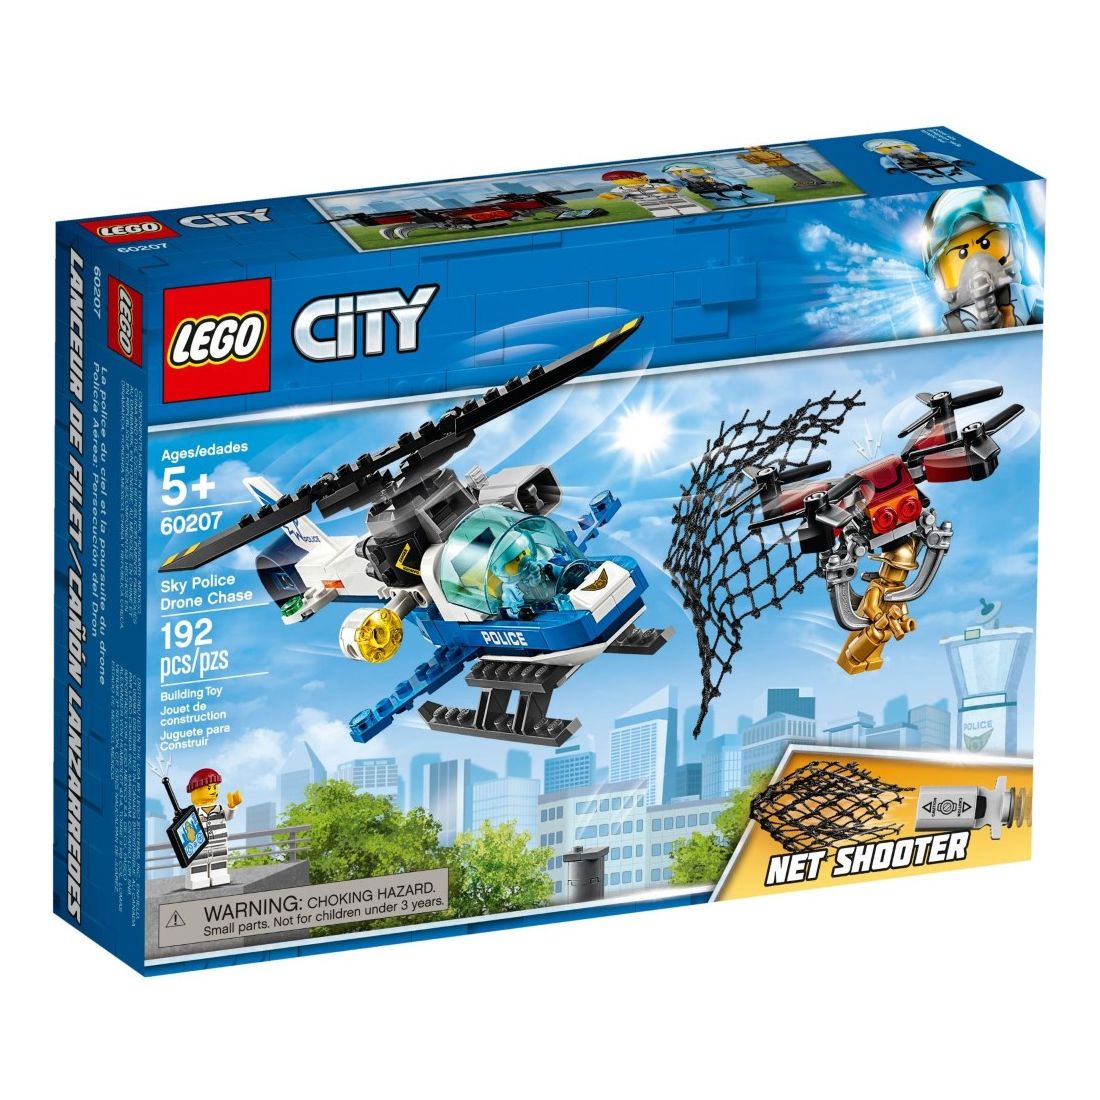 LEGO City Police Sky Police Drone Chase 60207